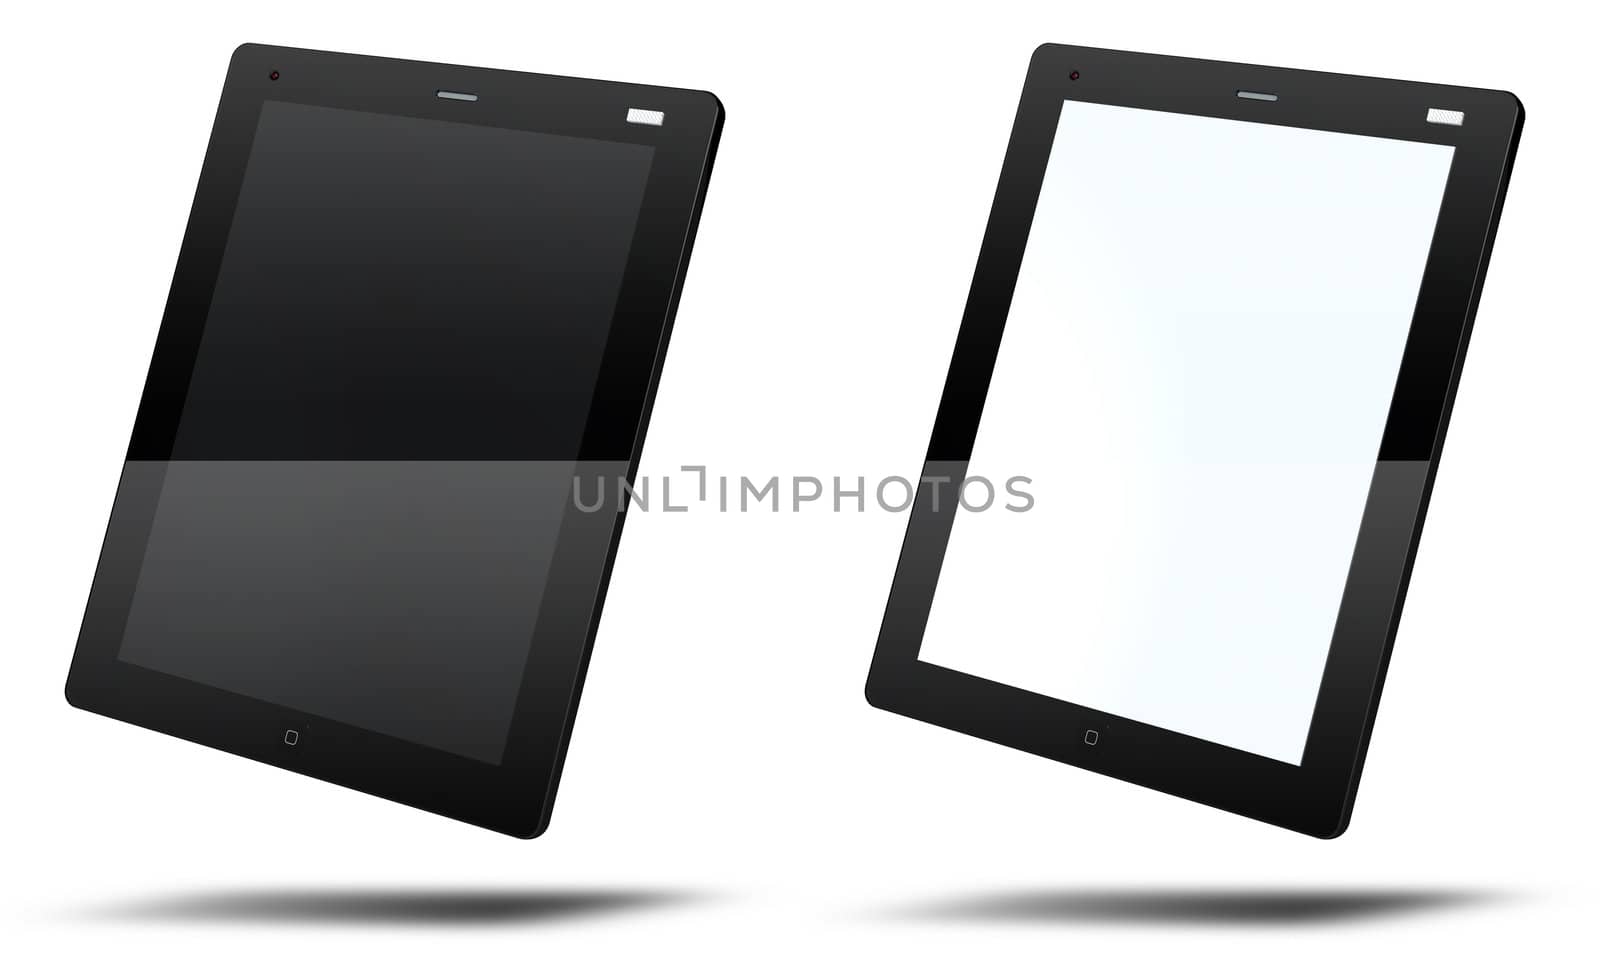 Black Tablet PC template. Two versions, on and off, to easily add new content on the screen of the tablet.